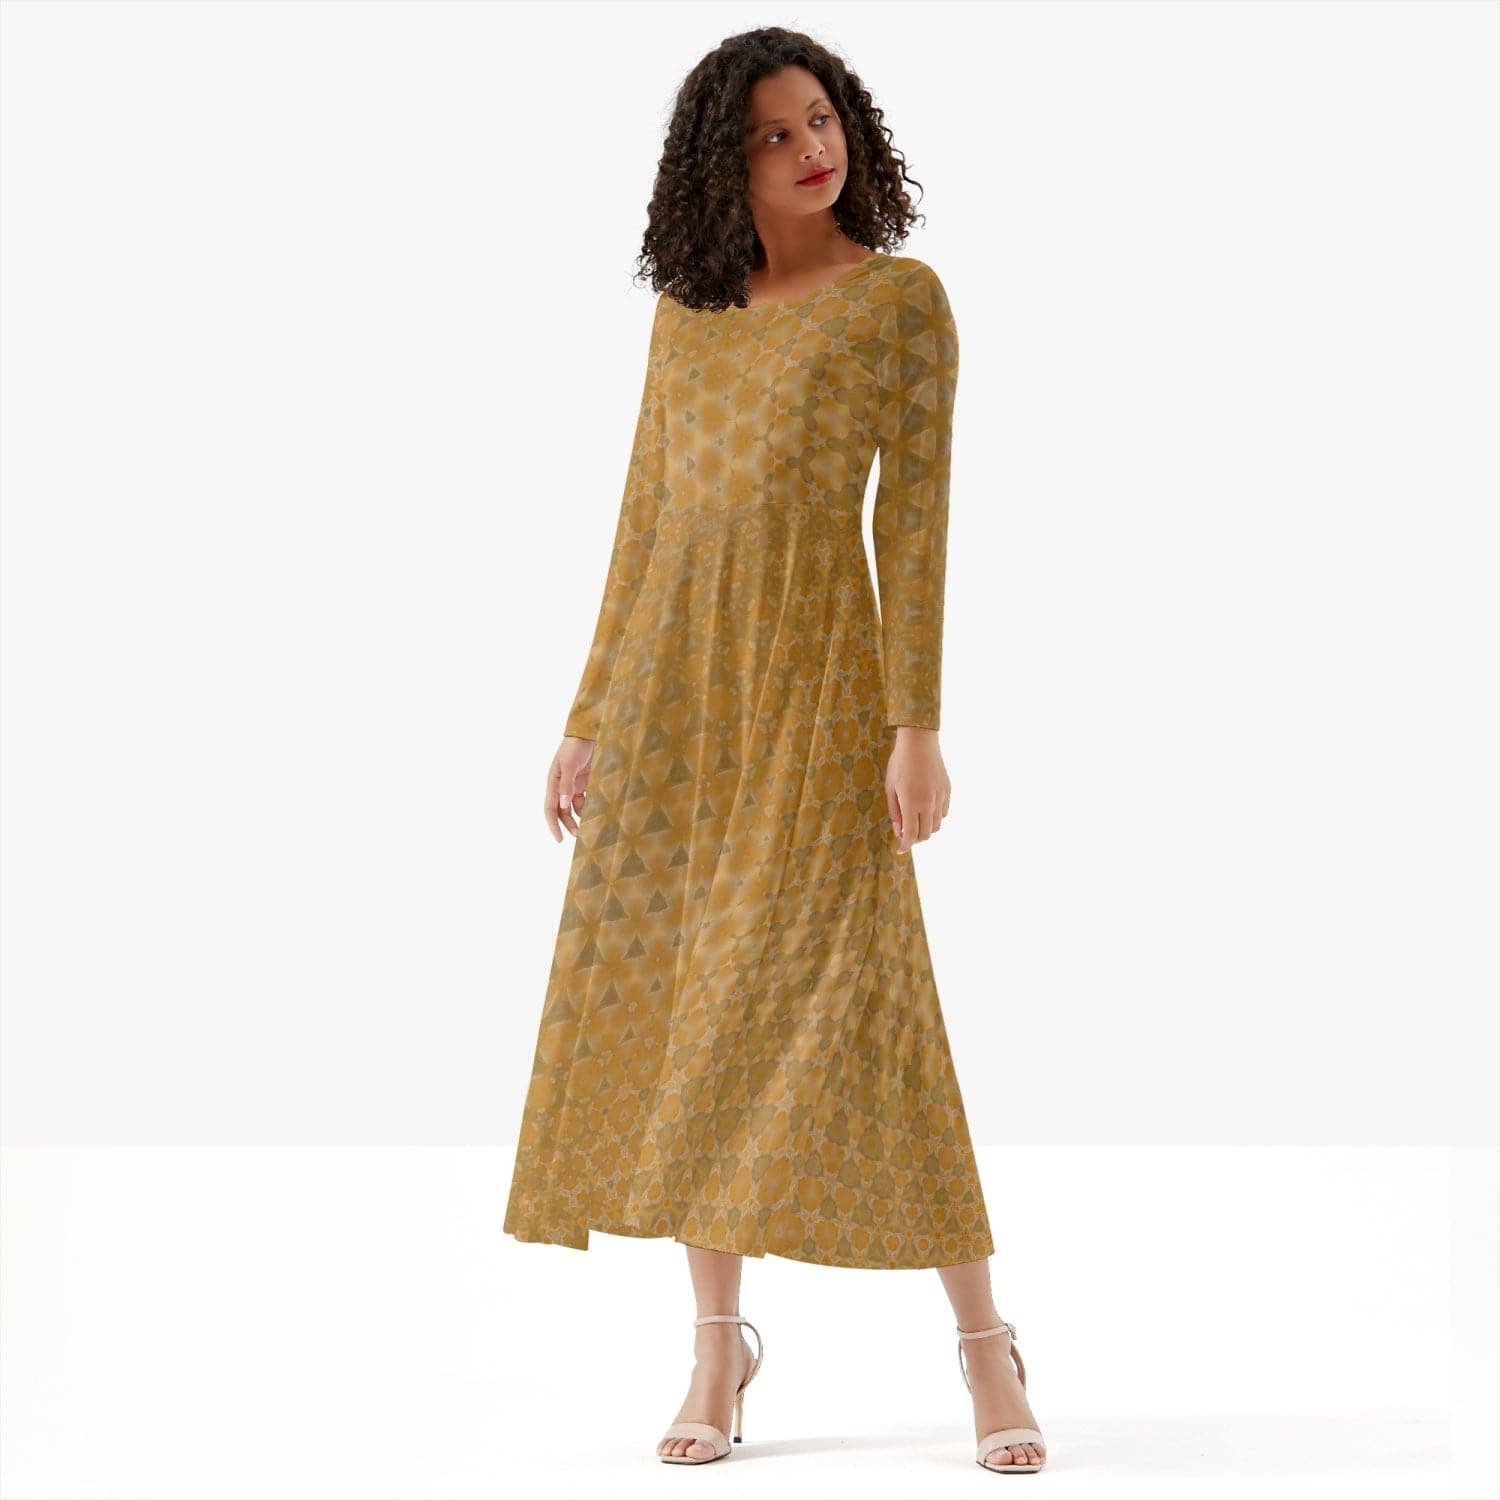 Shades of a Yellow Rose, Women's Long-Sleeve One-piece Dress, by Sensus Studio Design